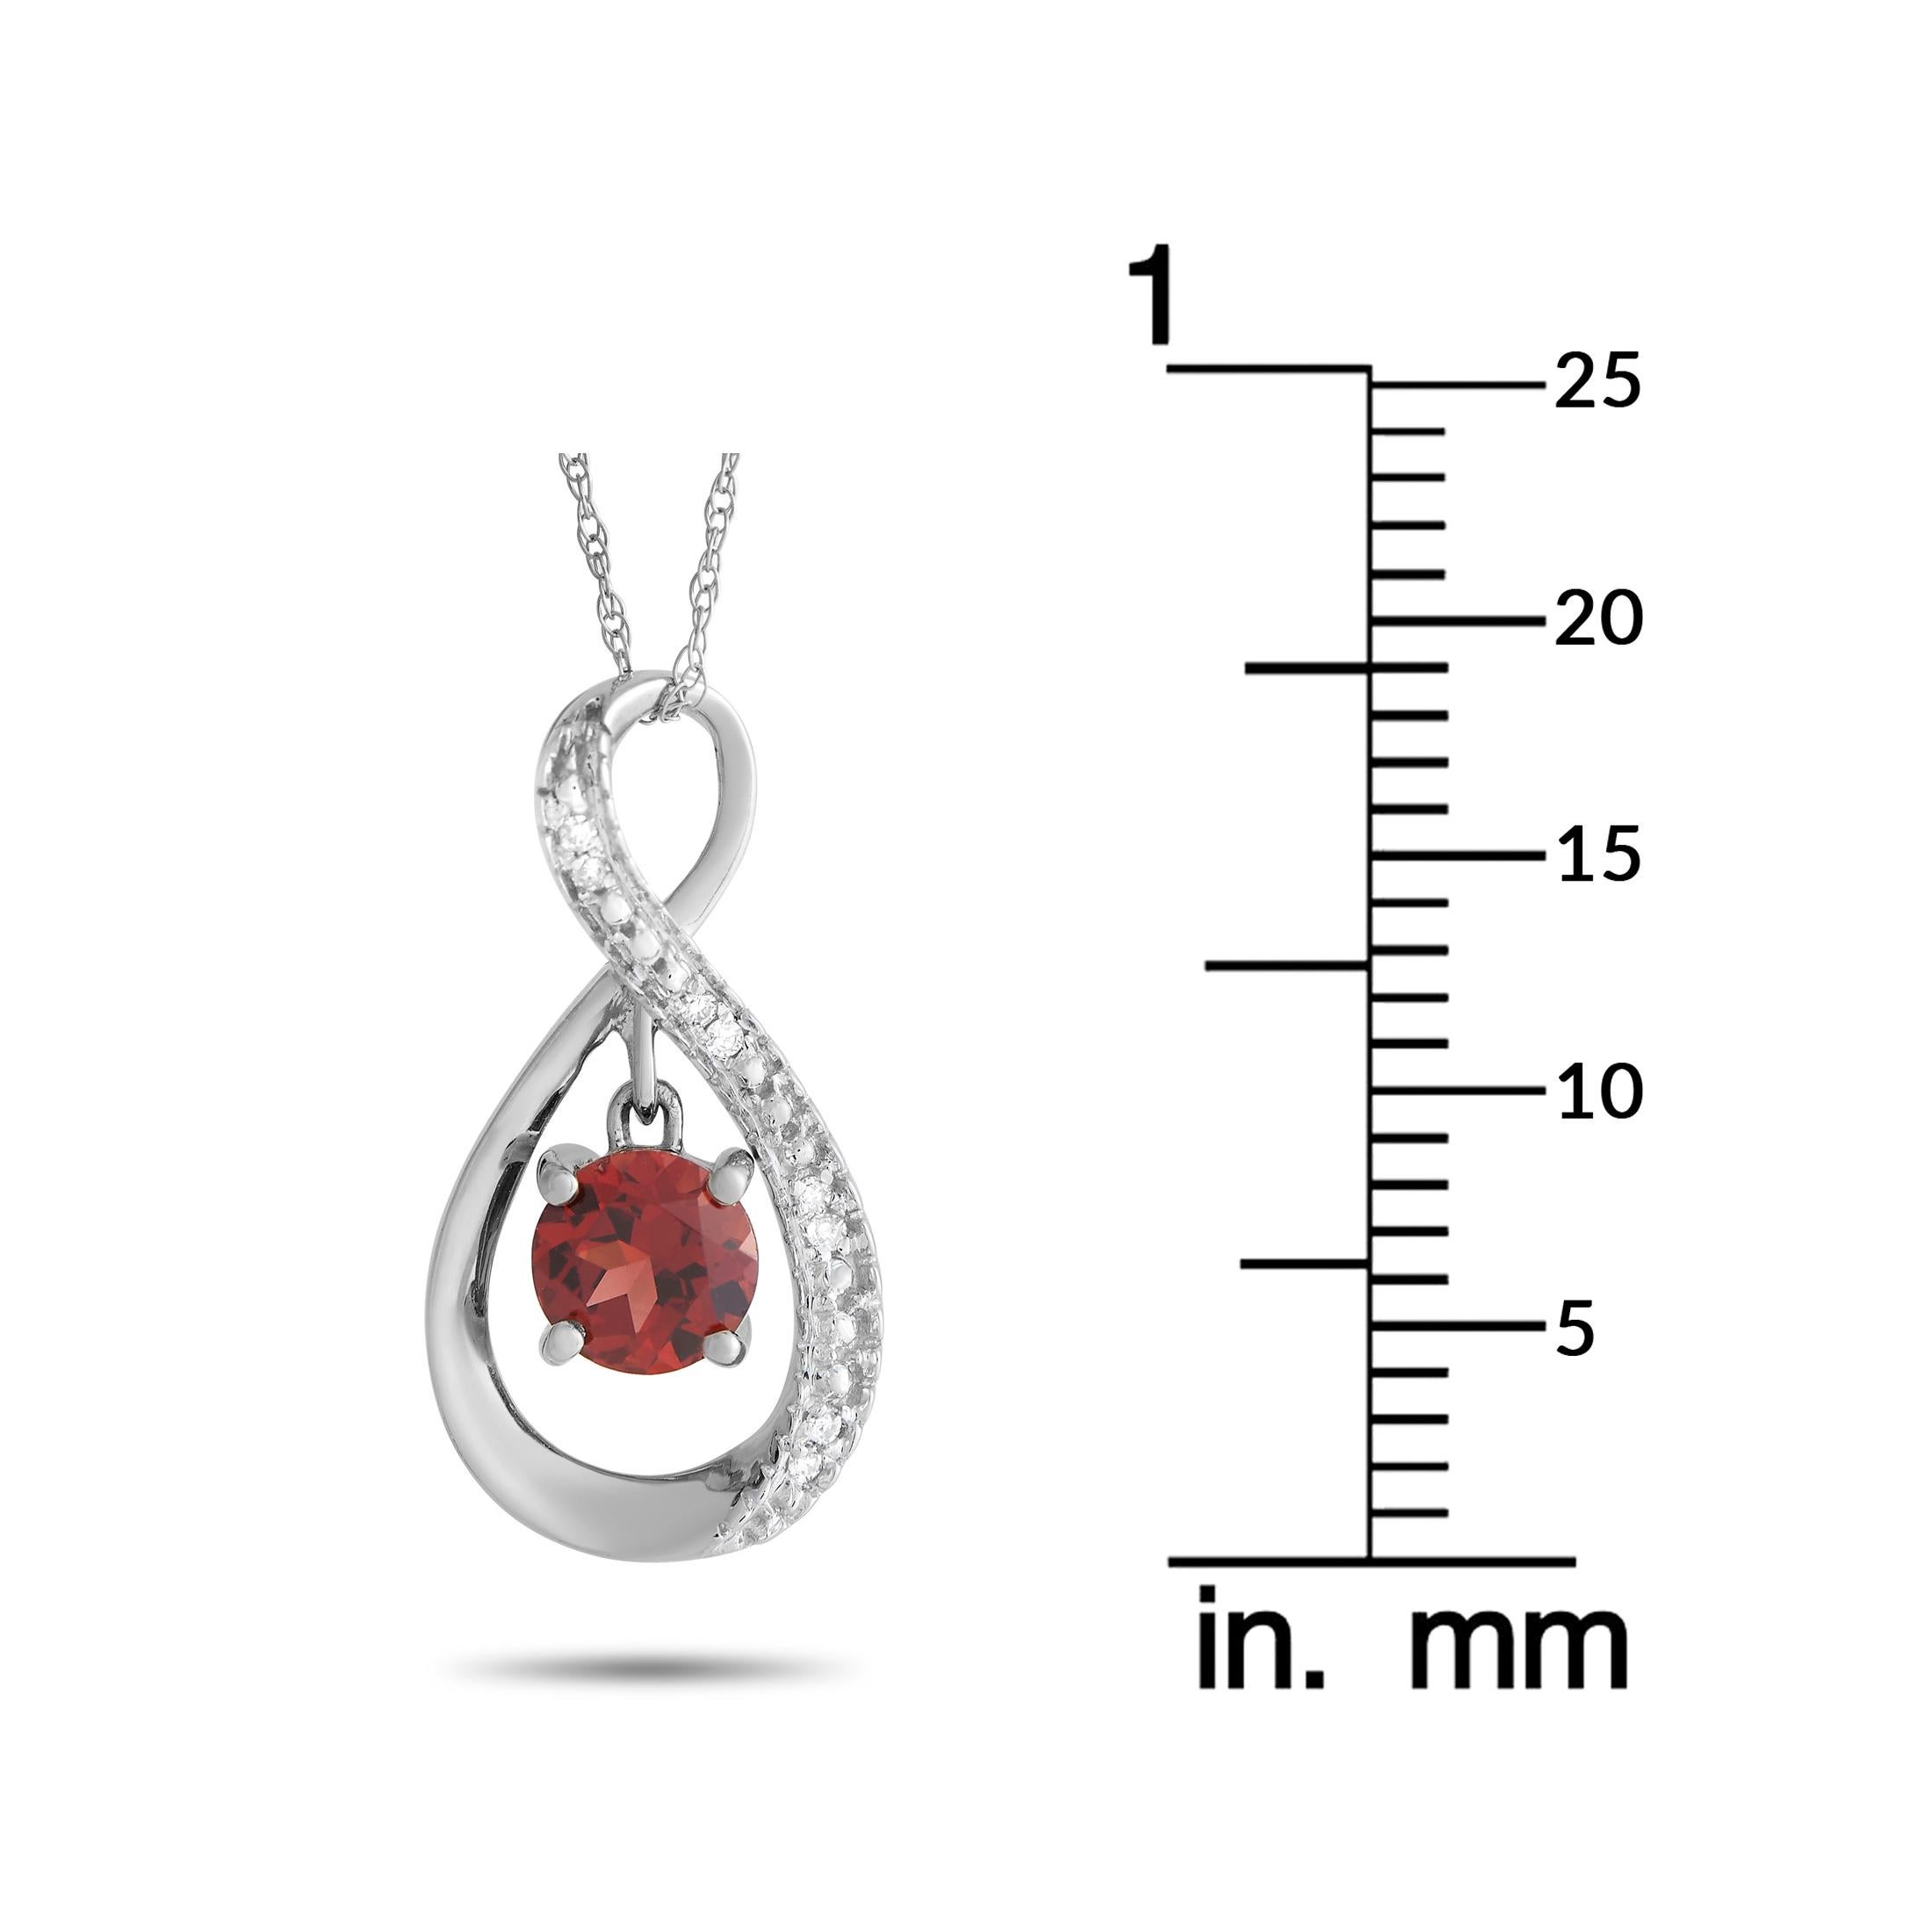 LB Exclusive 14K White Gold 0.03ct Diamond and Garnet Pendant Necklace In Excellent Condition For Sale In Southampton, PA